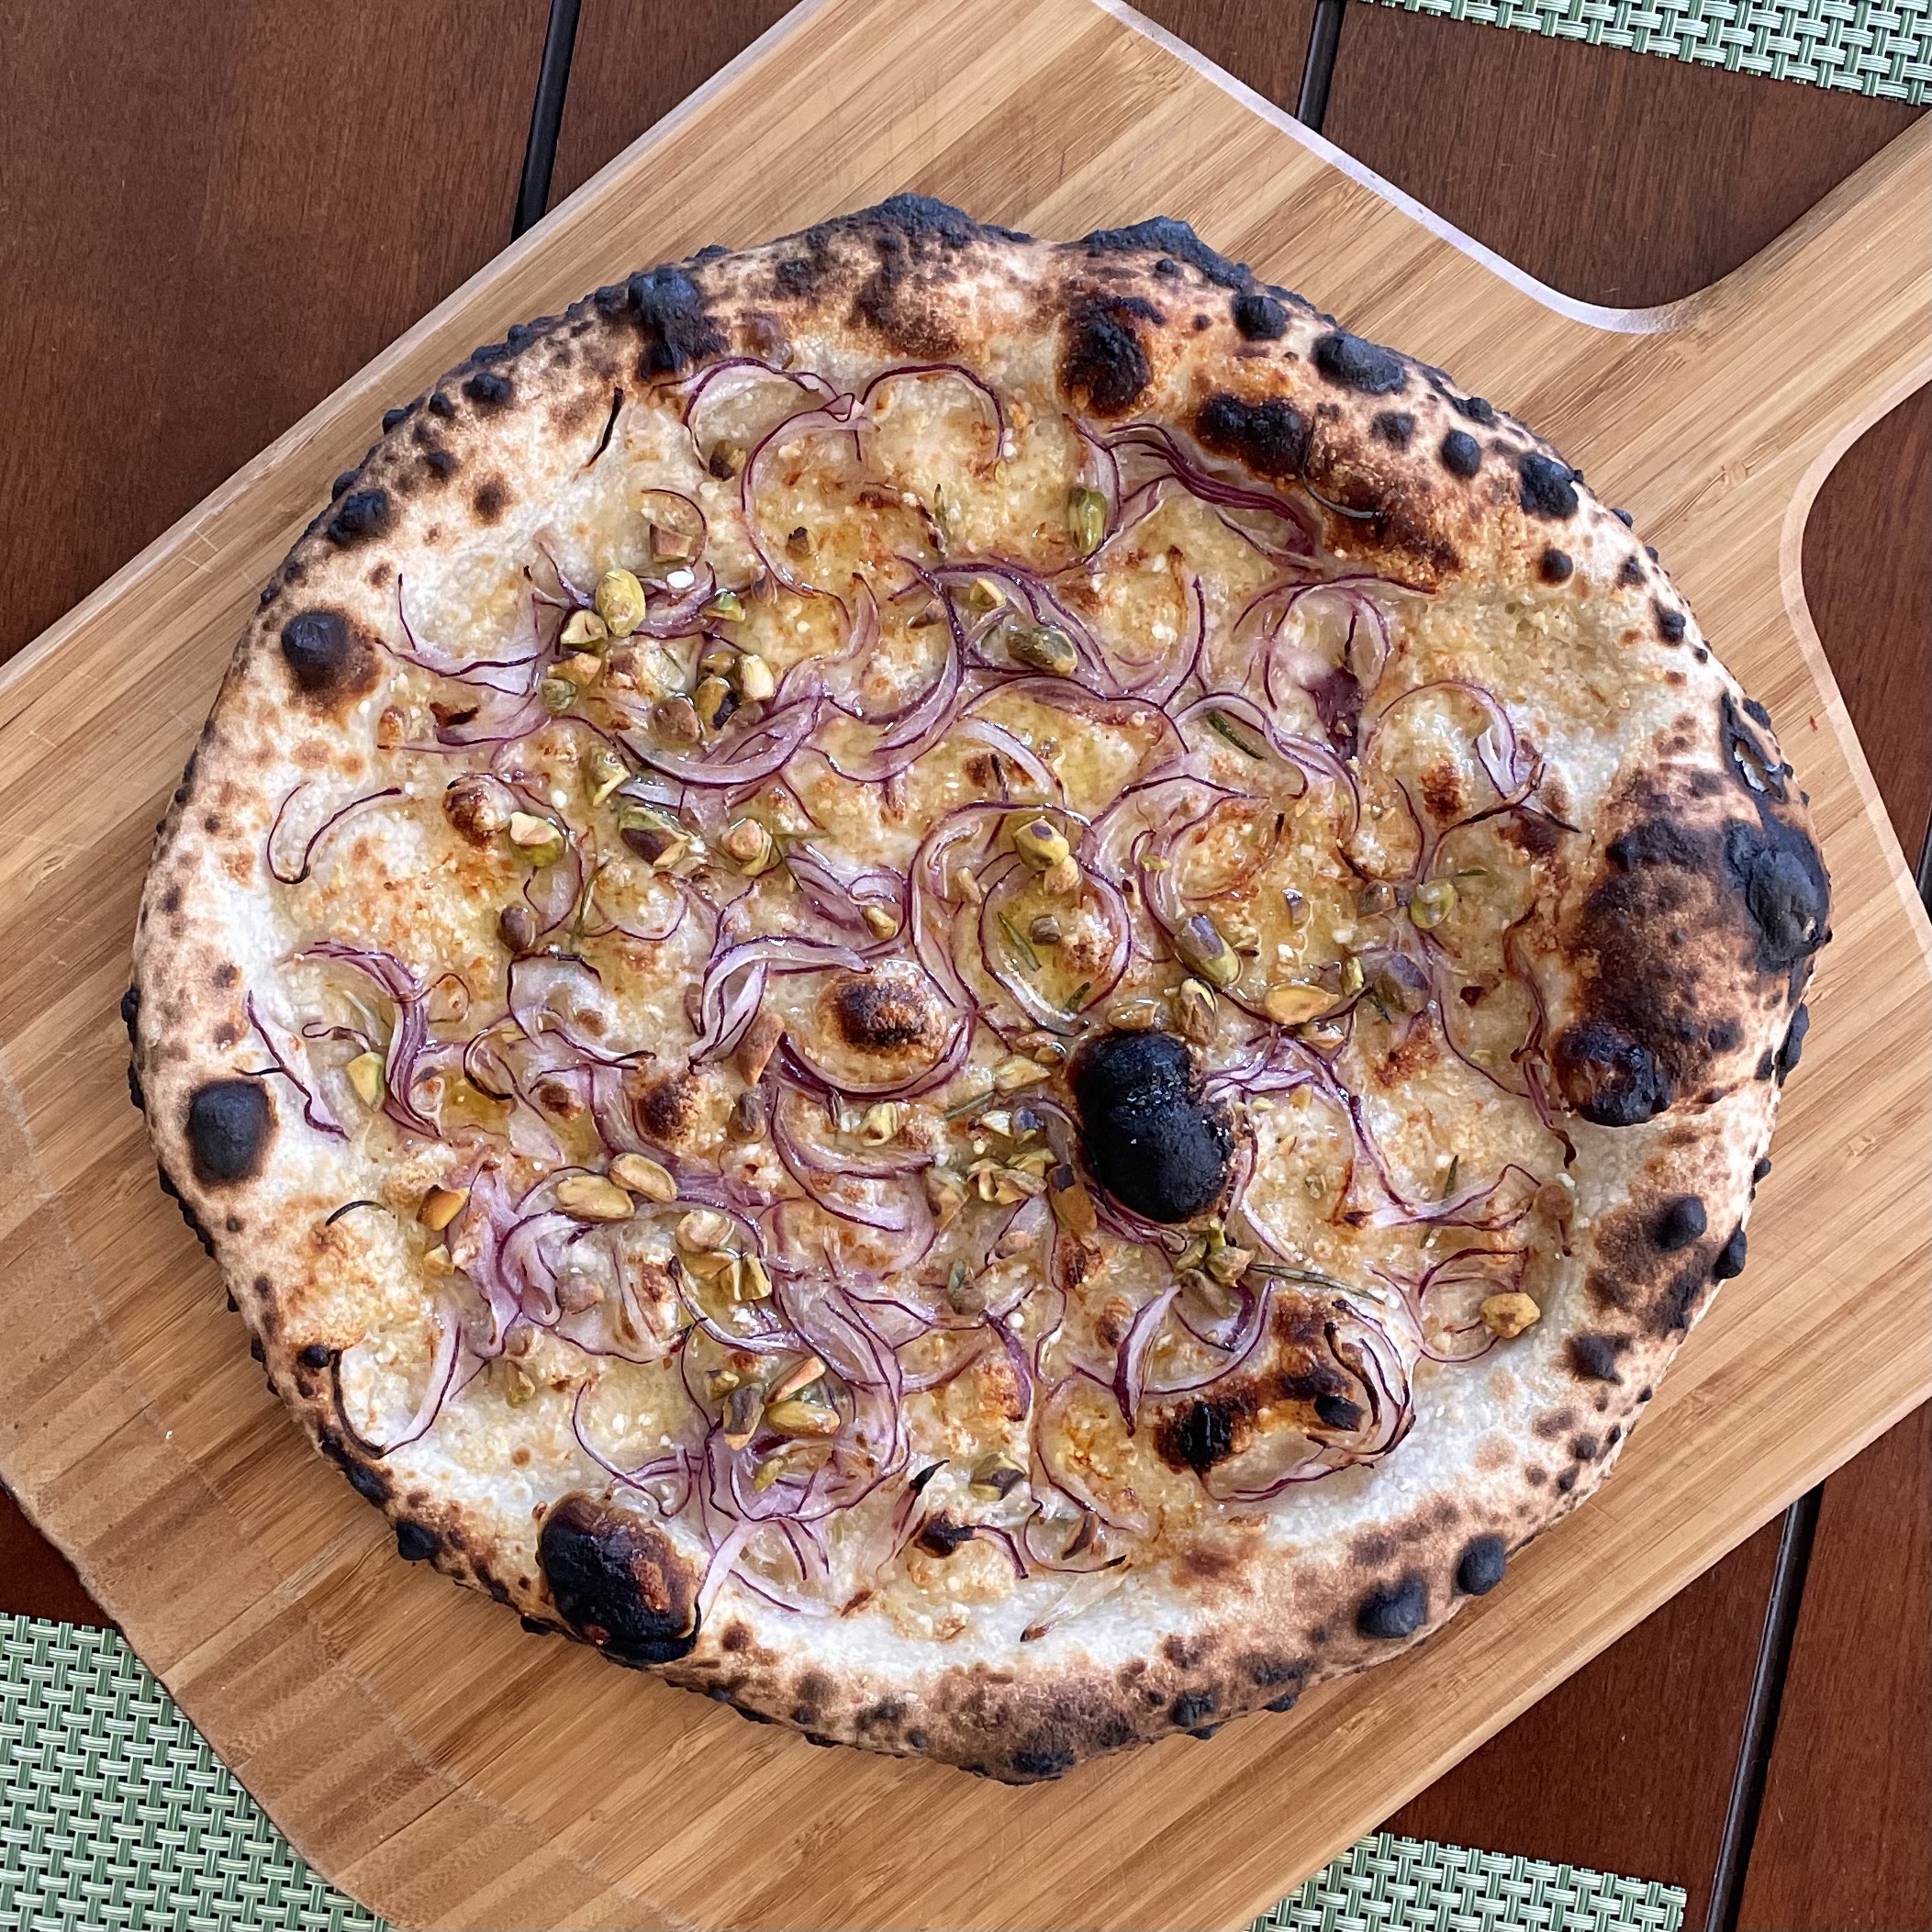 Chris Bianco’s Pizza Rosa in the Ooni Pizza Oven